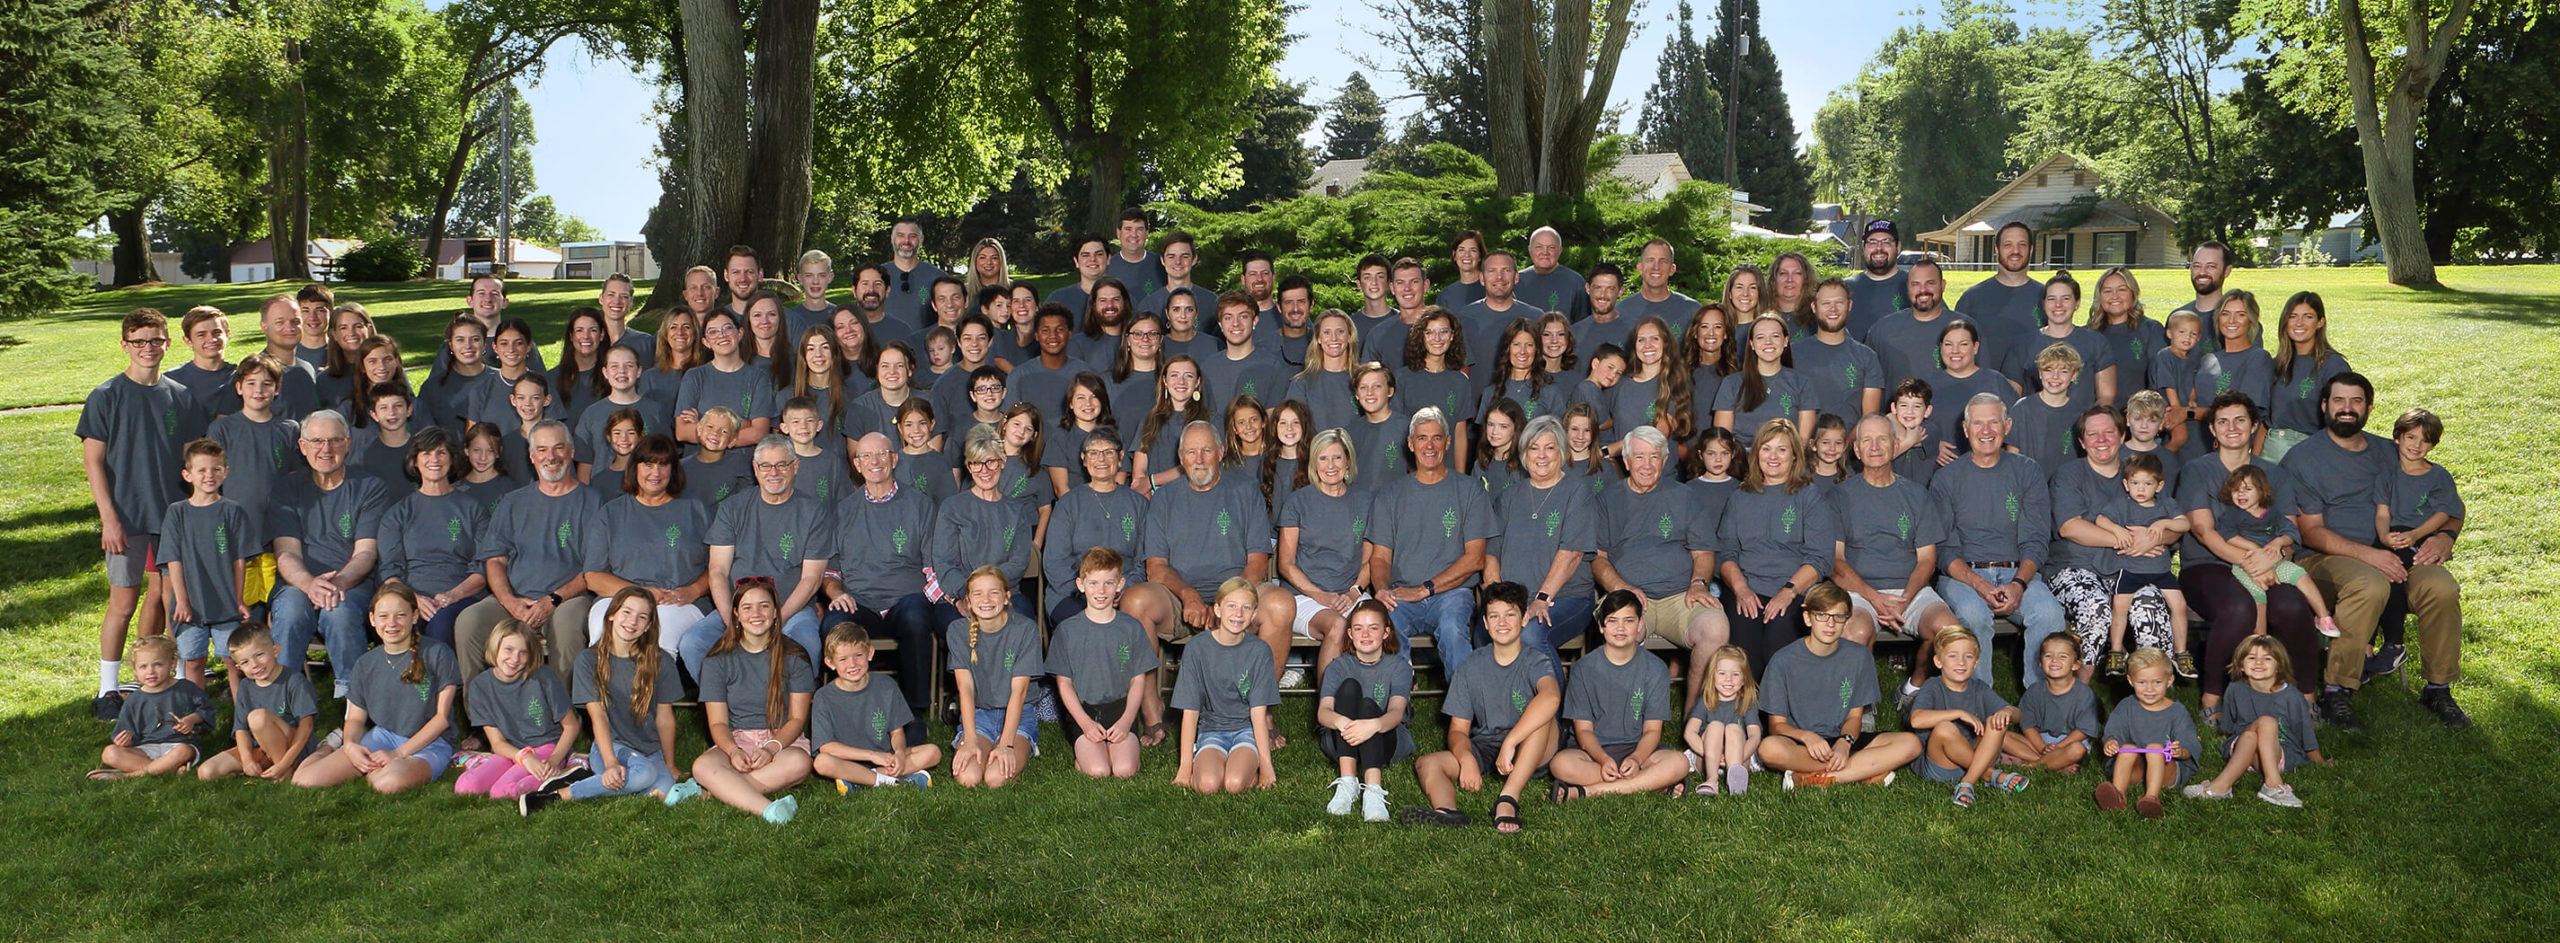 Family Reunion large group image Idaho Falls park summer fun get-together history cousins party meeting